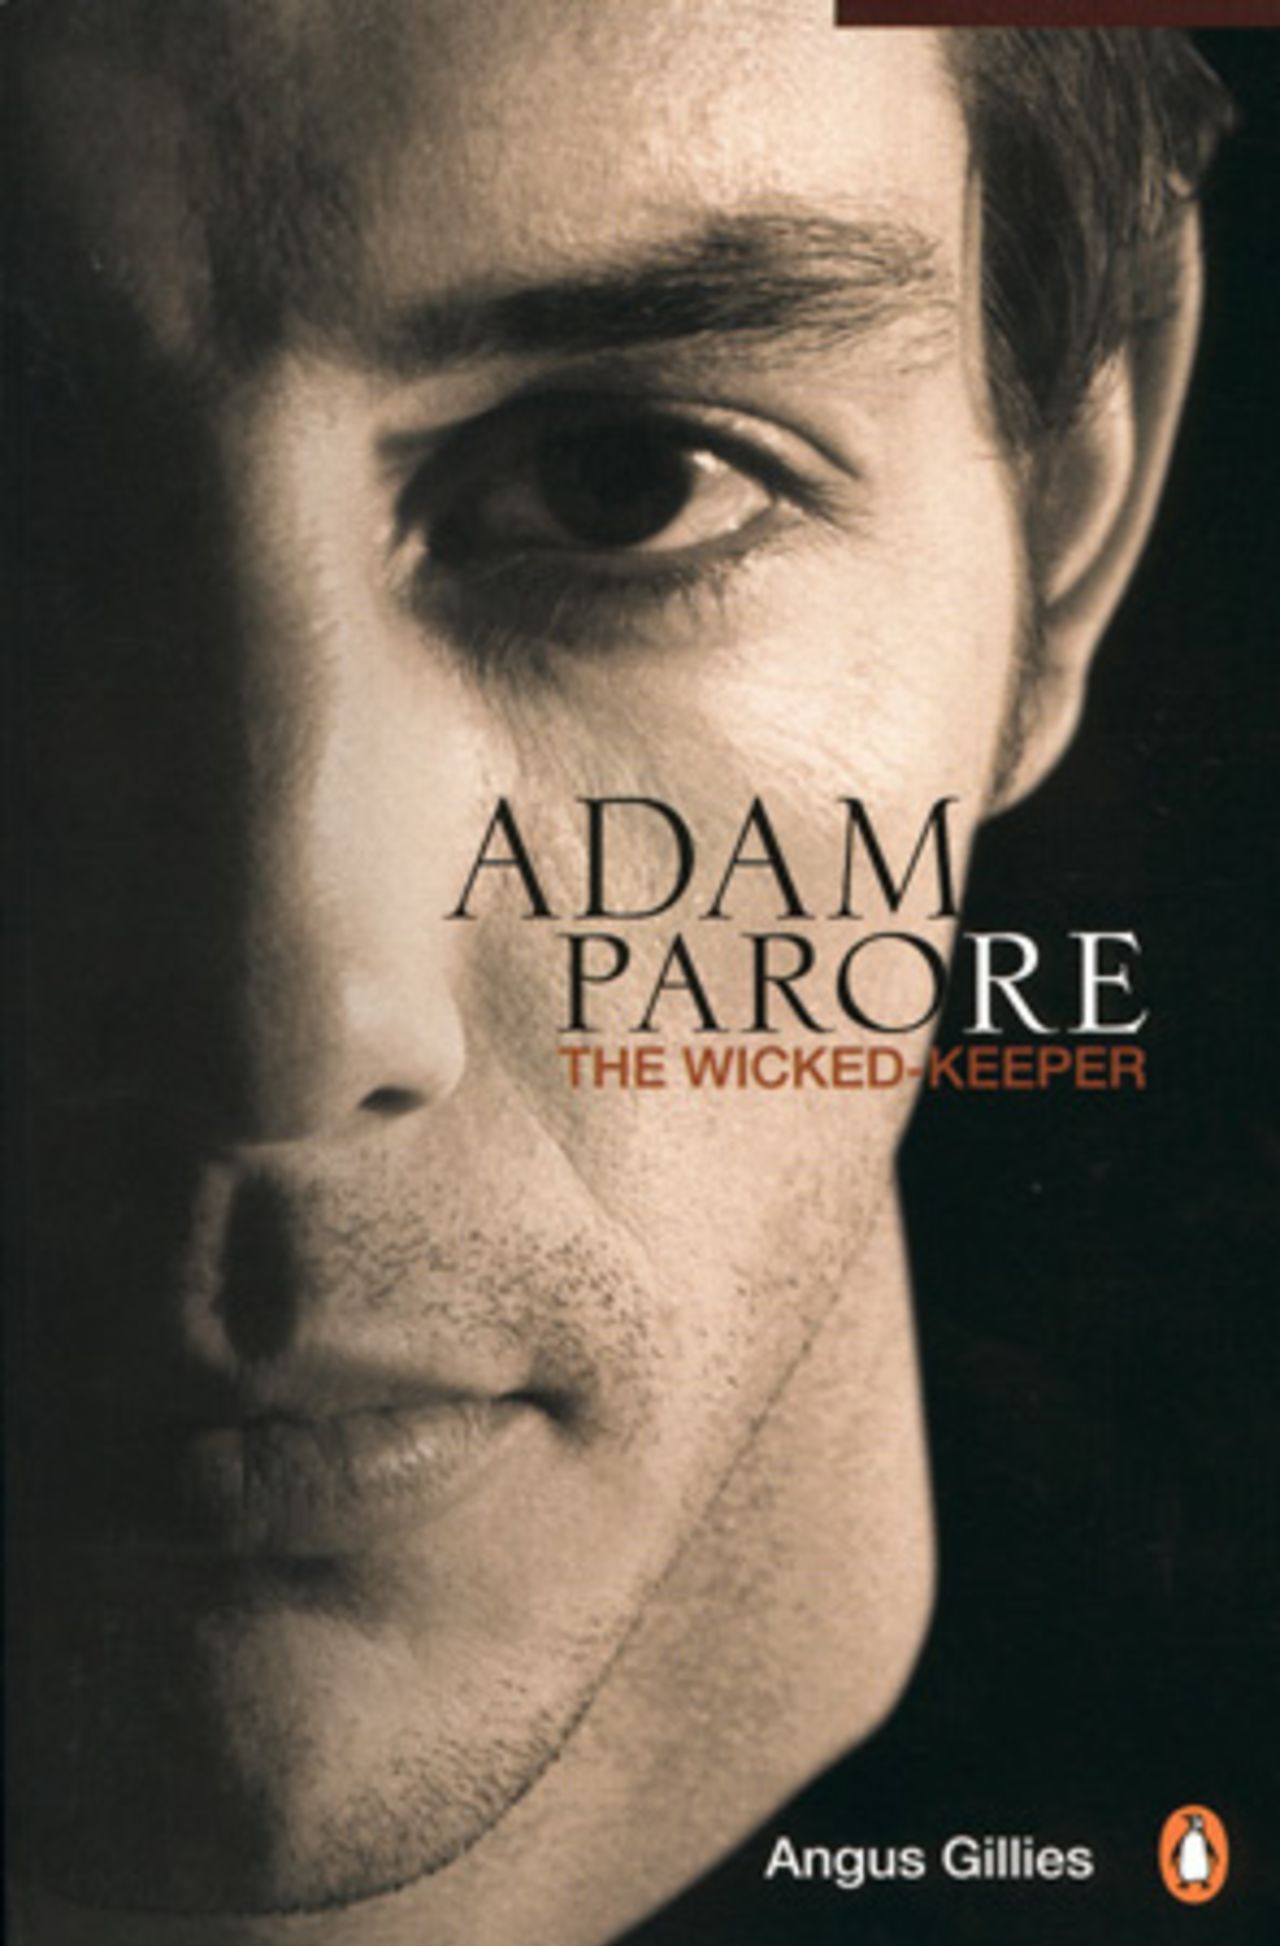 Cover of book 'Adam Parore - The Wicked-Keeper' by Angus Gillies.